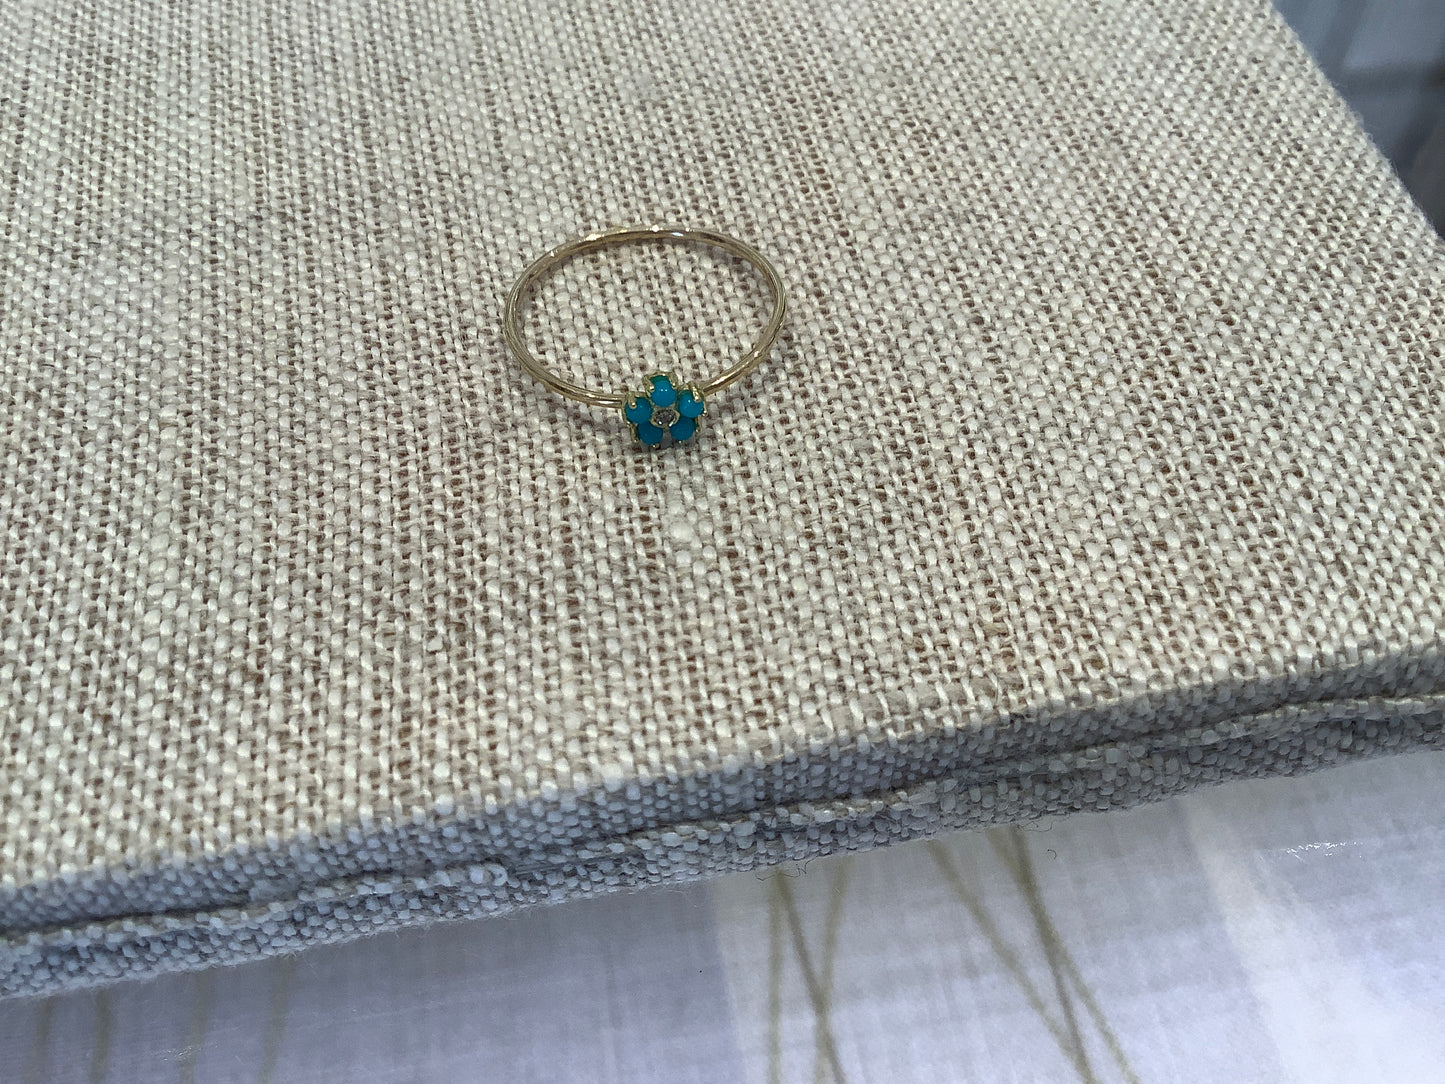 18K YELLOW GOLD TURQUOISE WITH DIAMOND CENTER MINI FLOWER RING-size 6.5